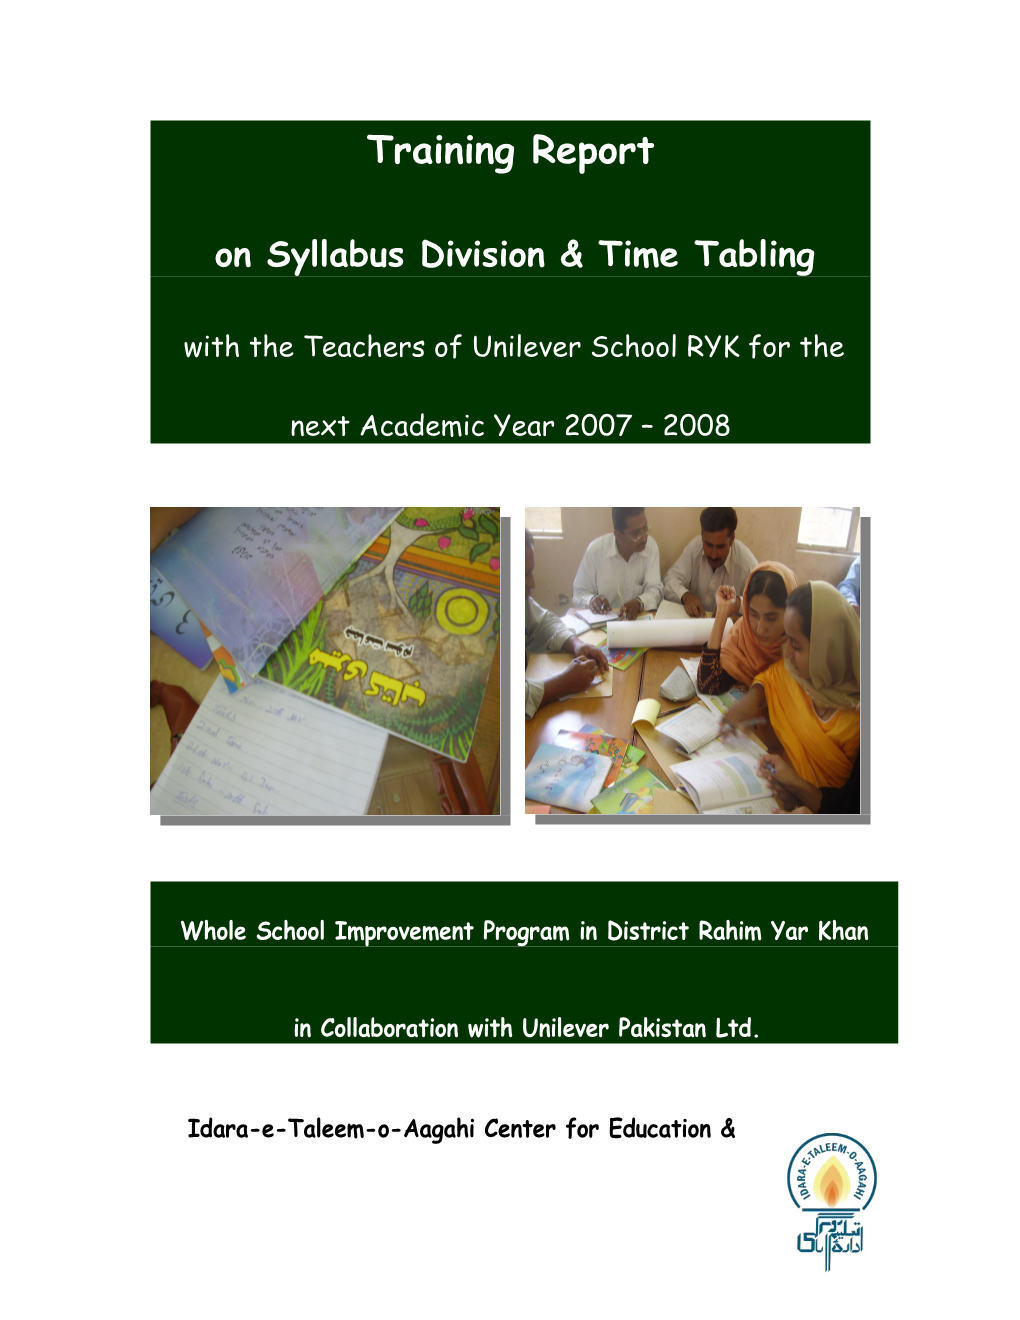 Report on the Session of Syllabus Division & Time Tabling with the Teachers of Unilever